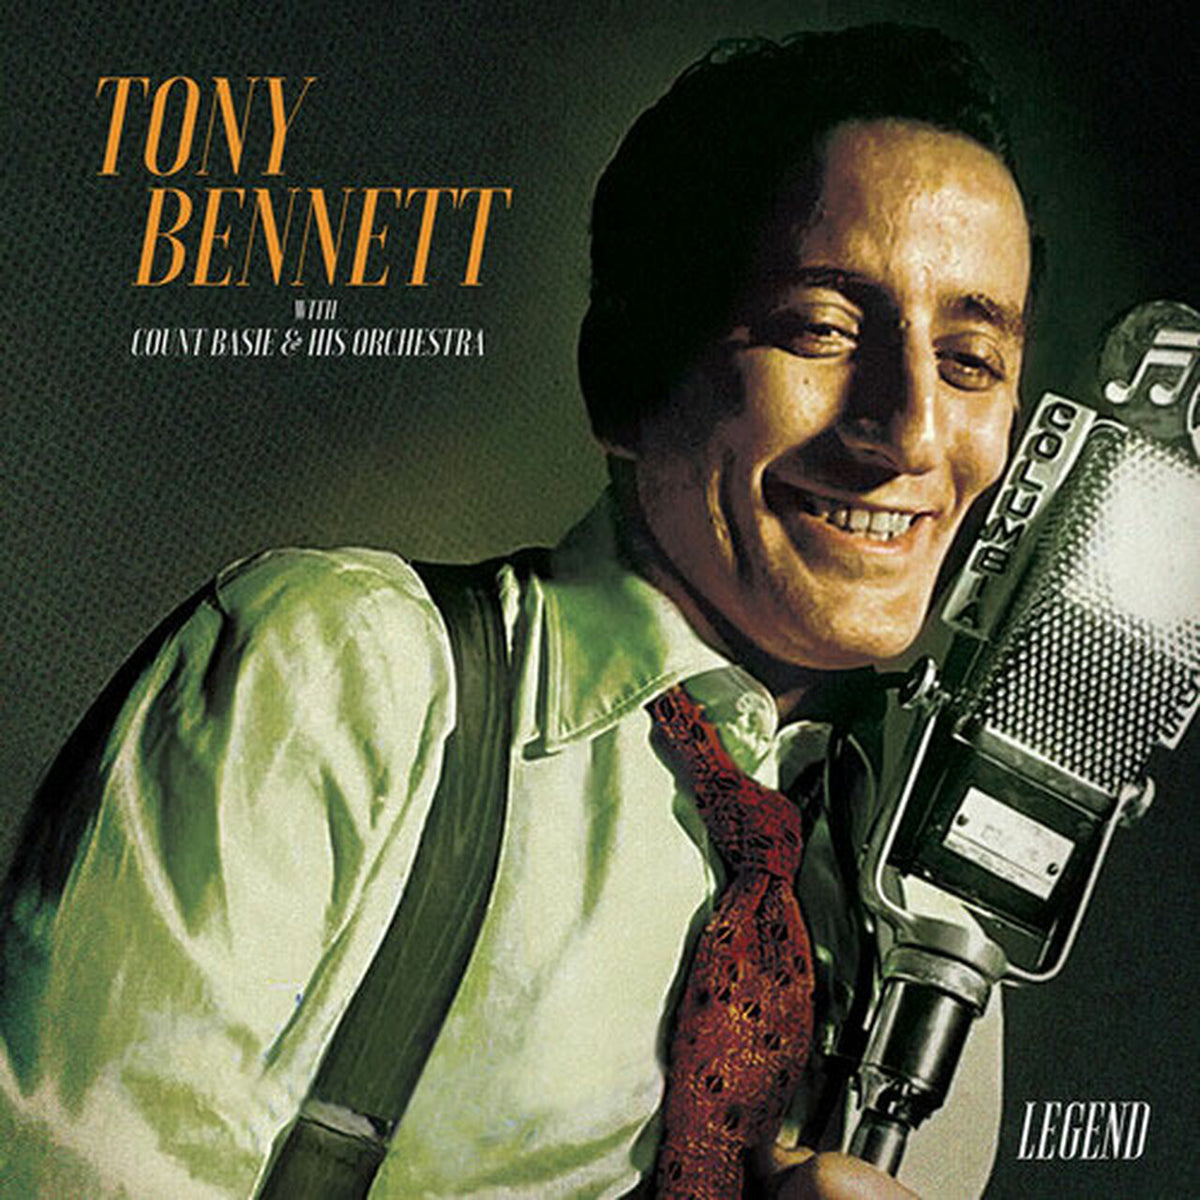 Tony Bennett with Count Basie & His Orchestra – Legend LP (Gold Vinyl)